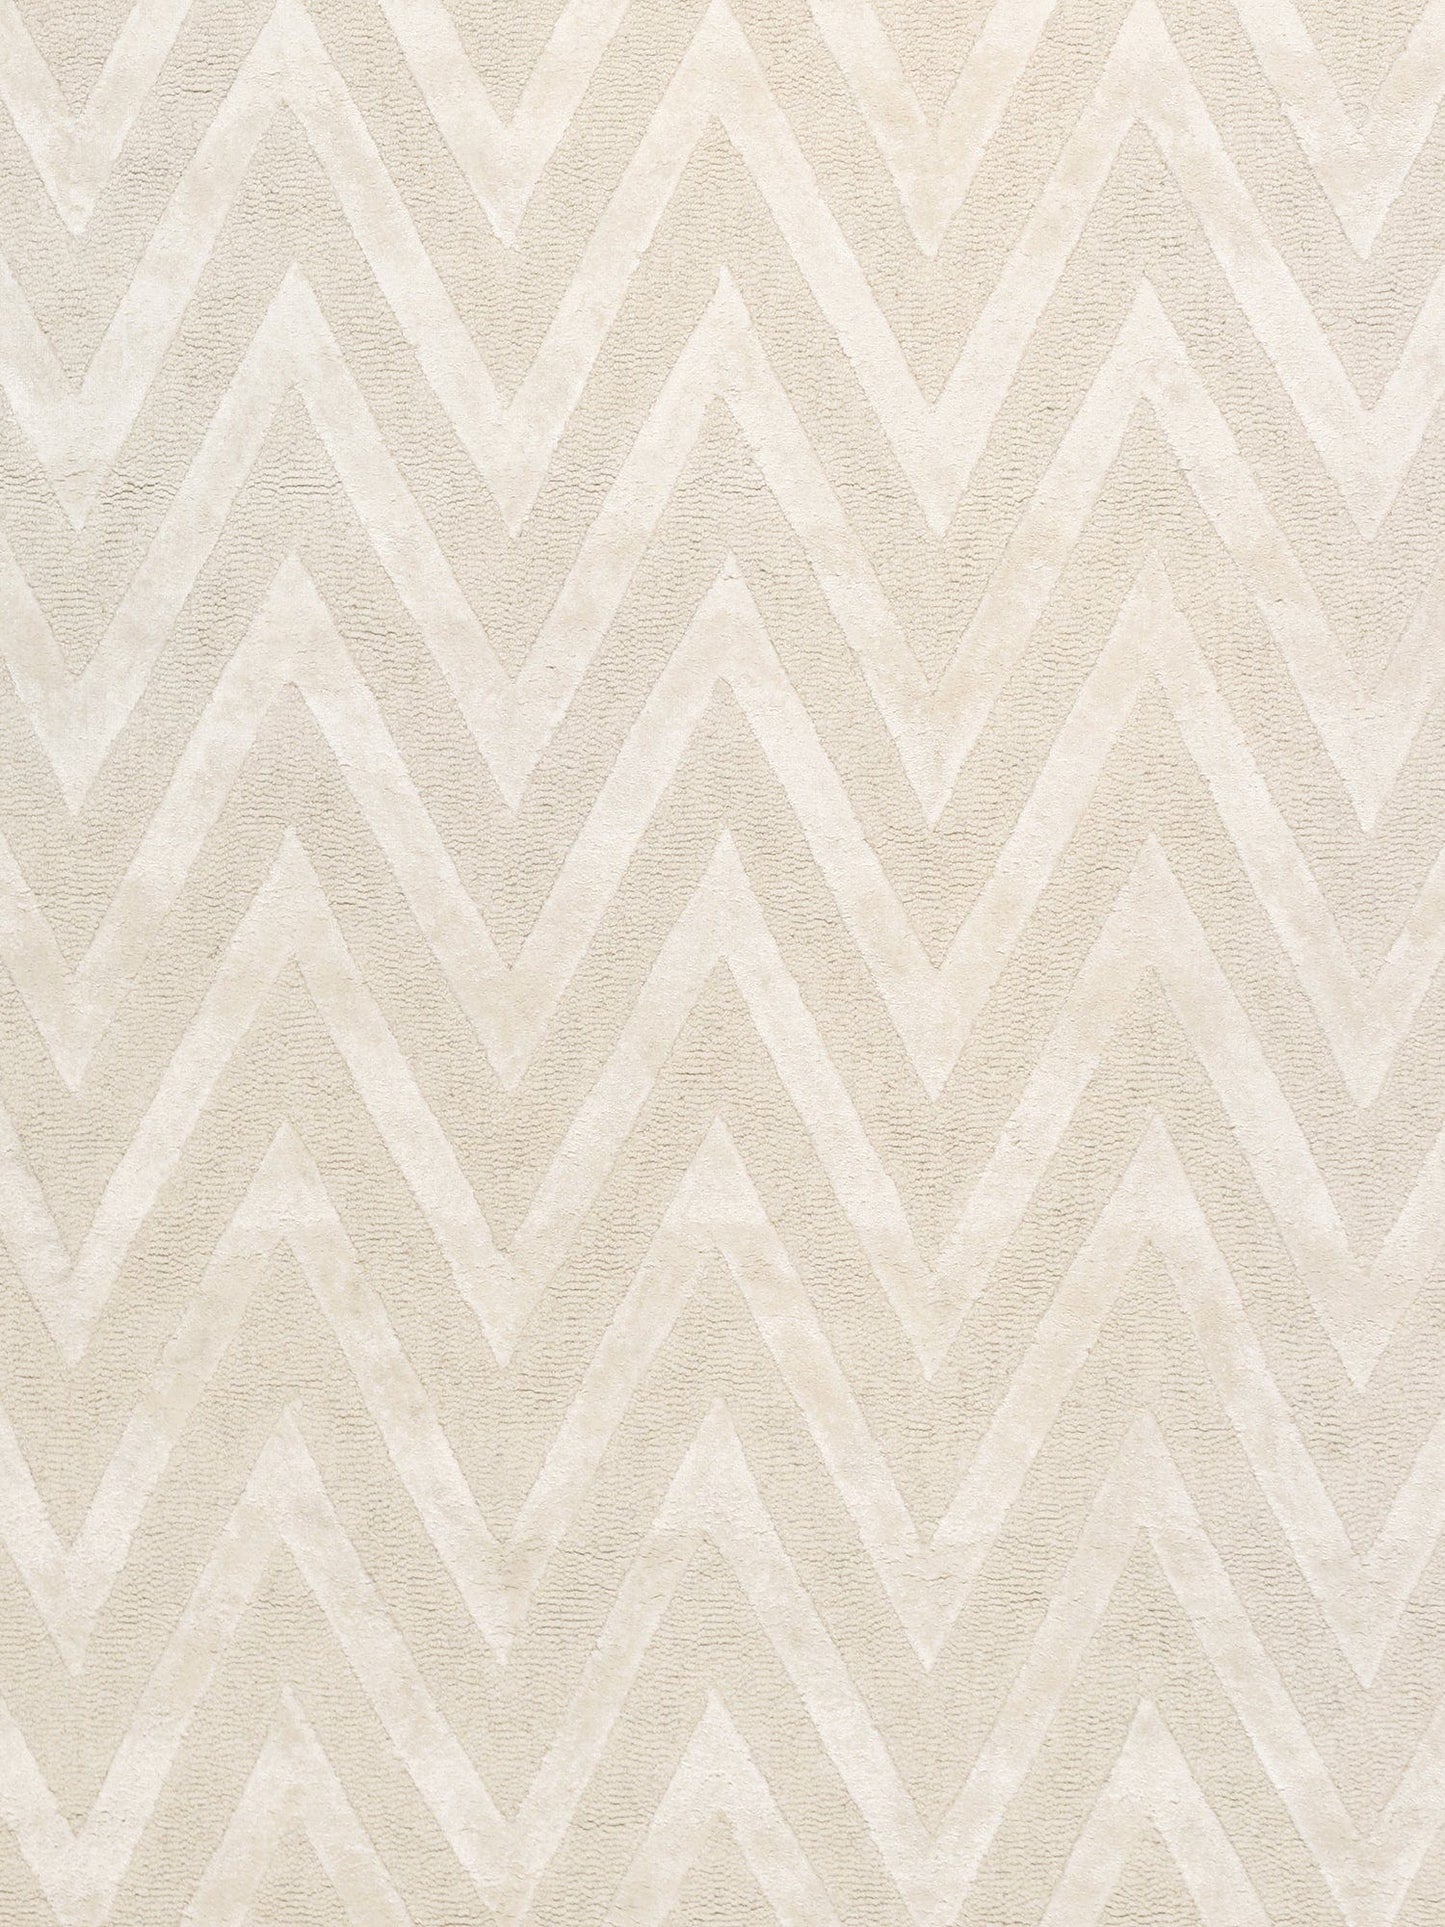 Edgy Collection Hand-Tufted Bamboo Silk & wool Ivory Area Rug